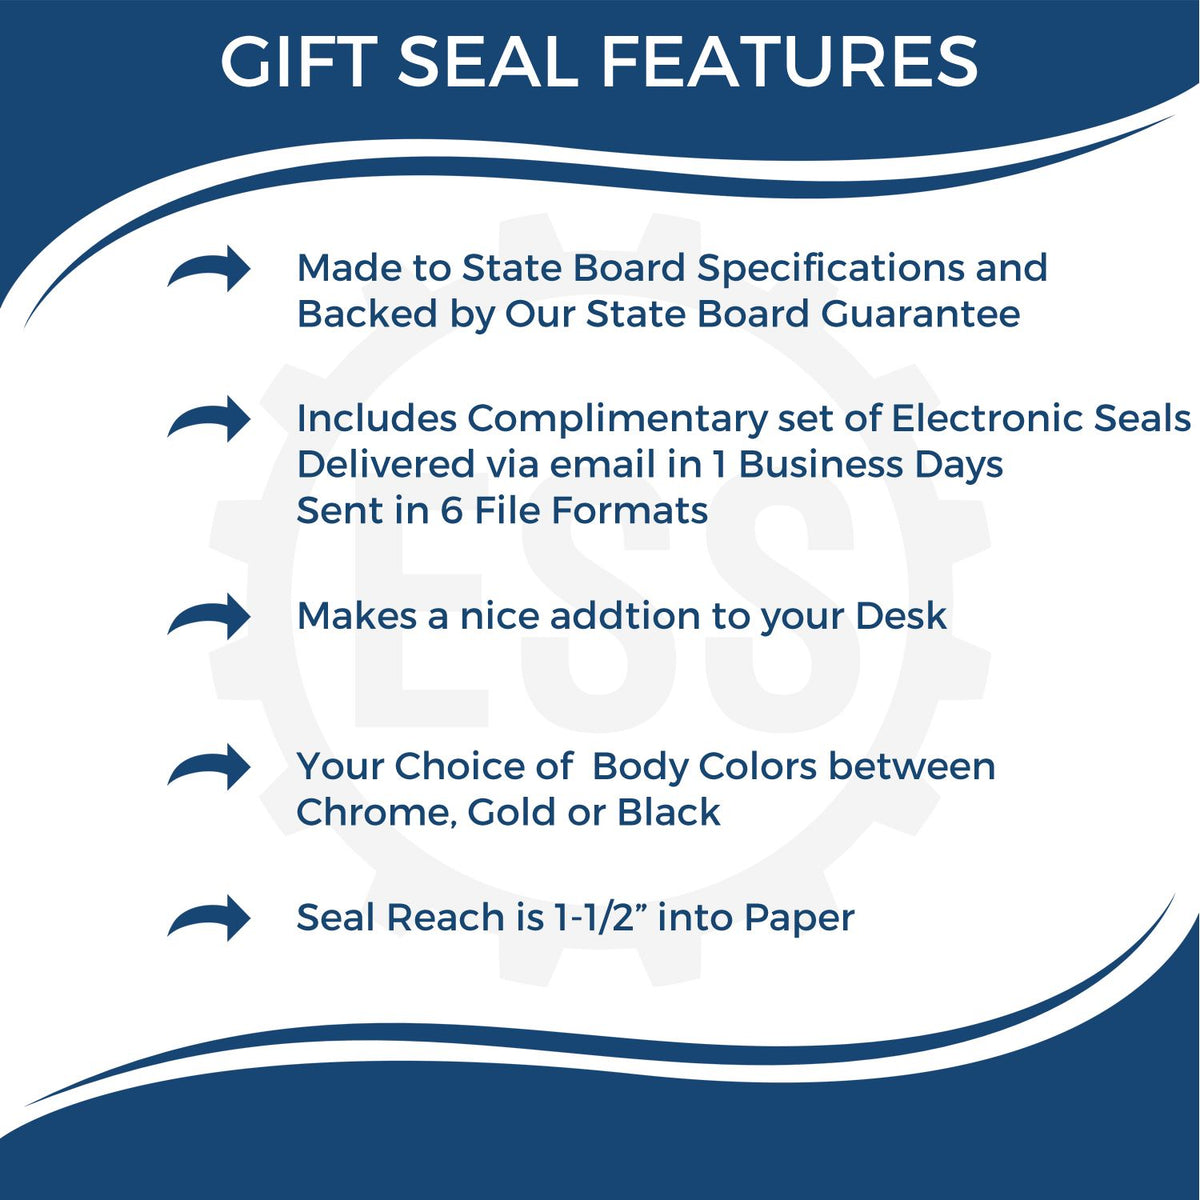 A picture of an infographic highlighting the selling points for the Gift Delaware Geologist Seal